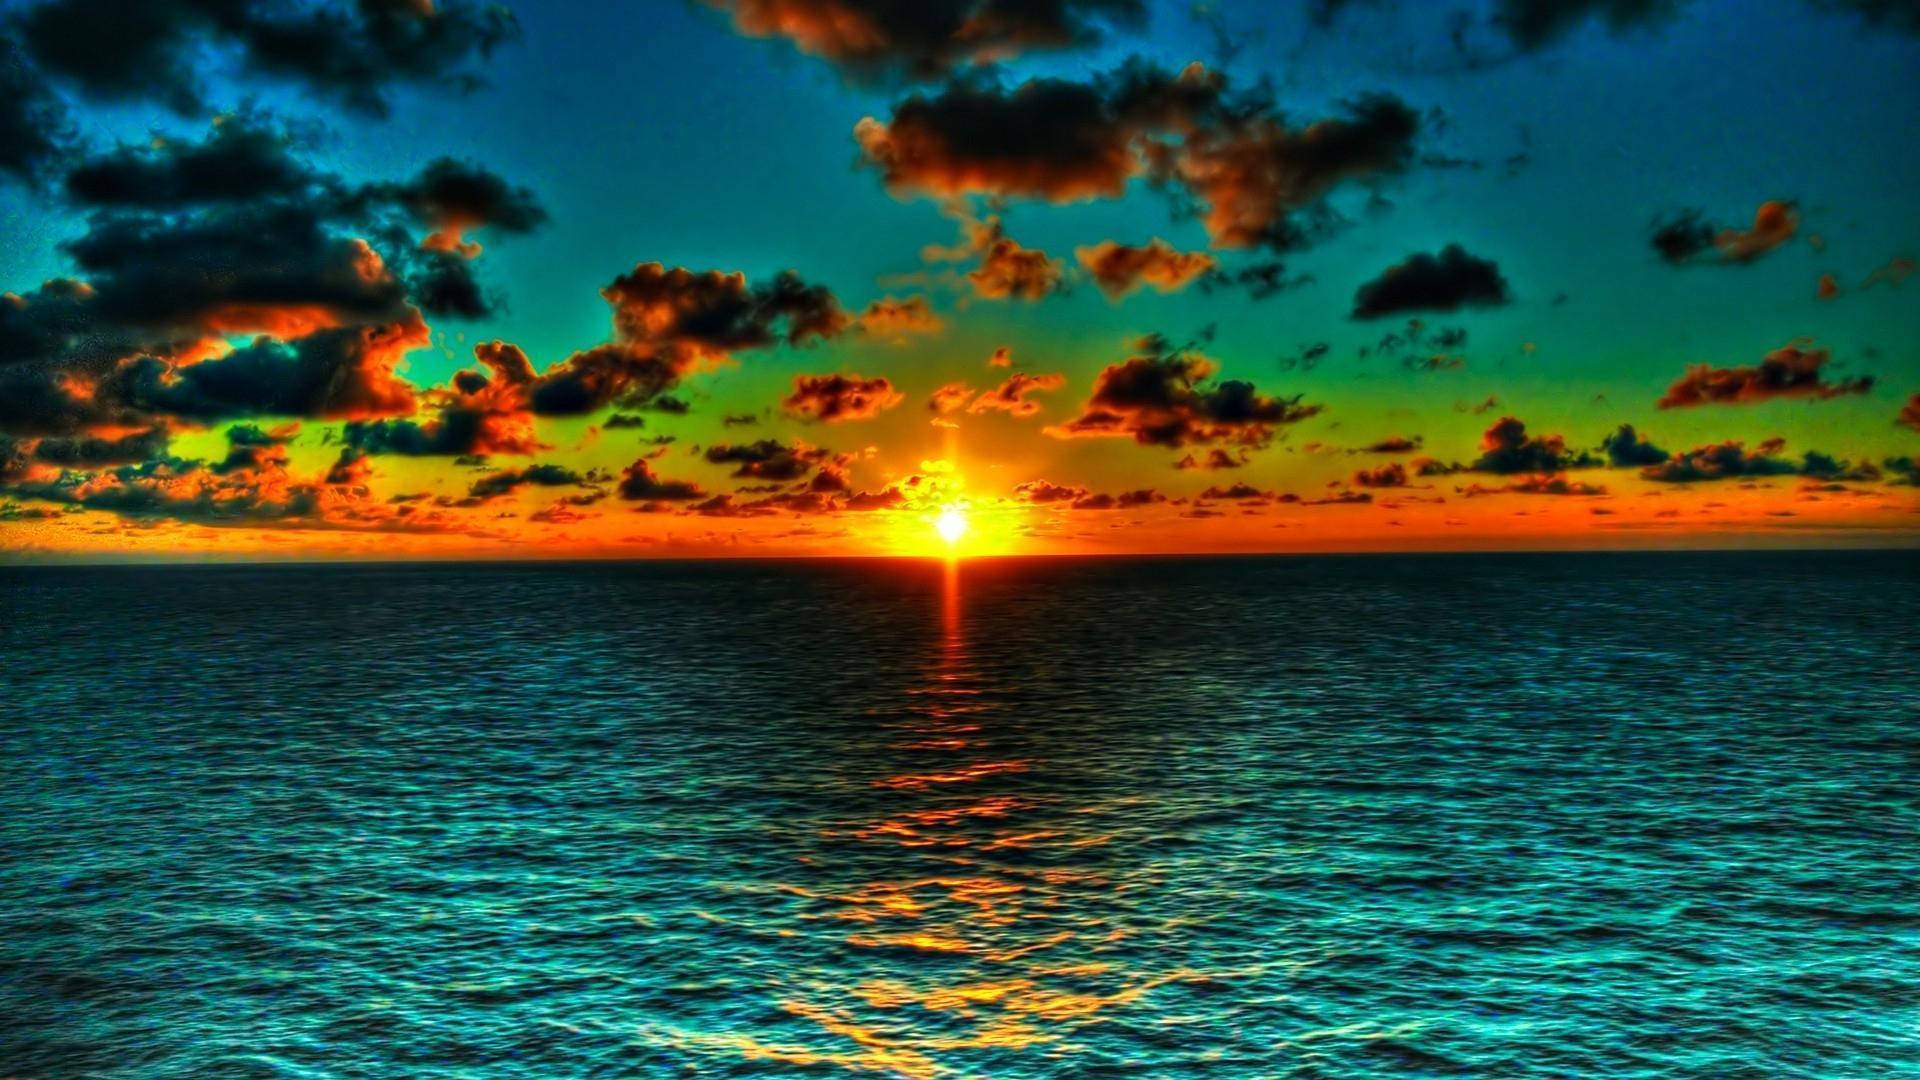 Free Sunset Wallpaper Downloads, [1700+] Sunset Wallpapers for FREE |  